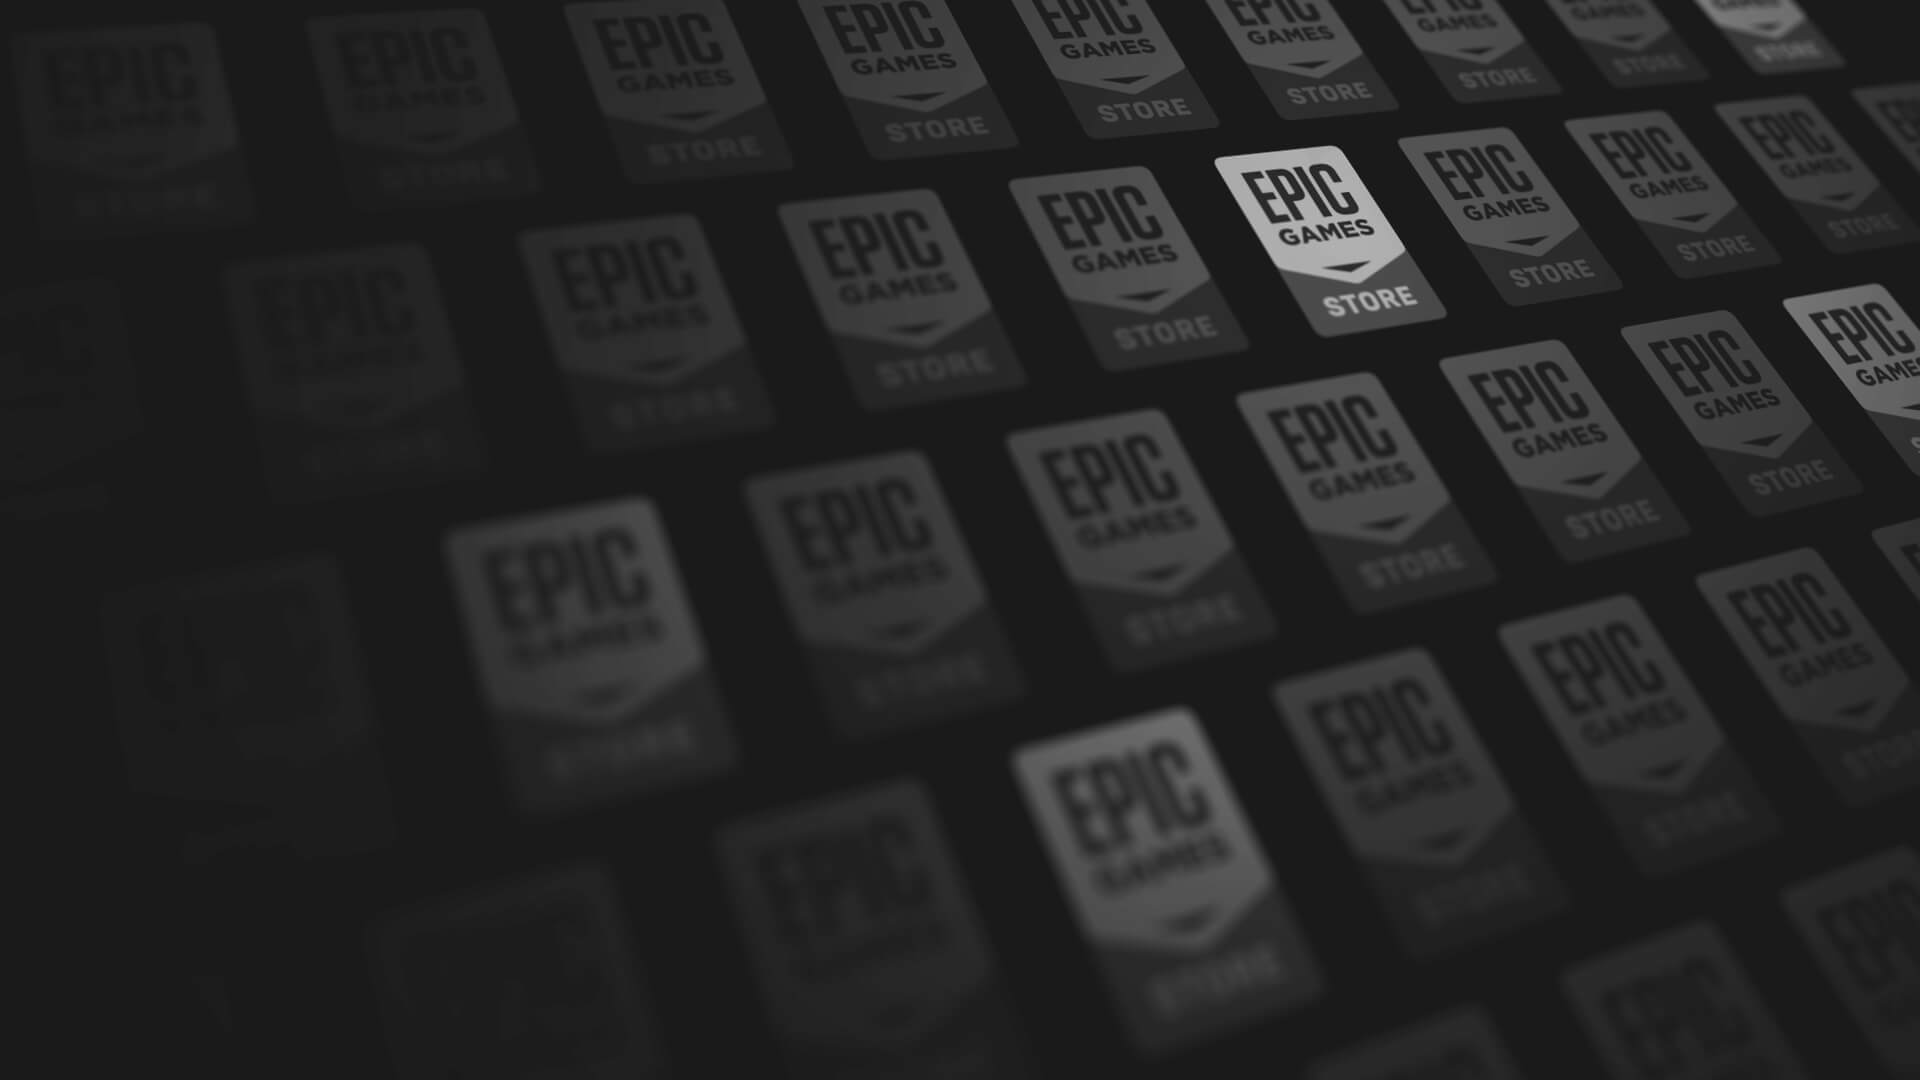 Epic Games Store Introduces A 5% Back Reward Program On Purchases